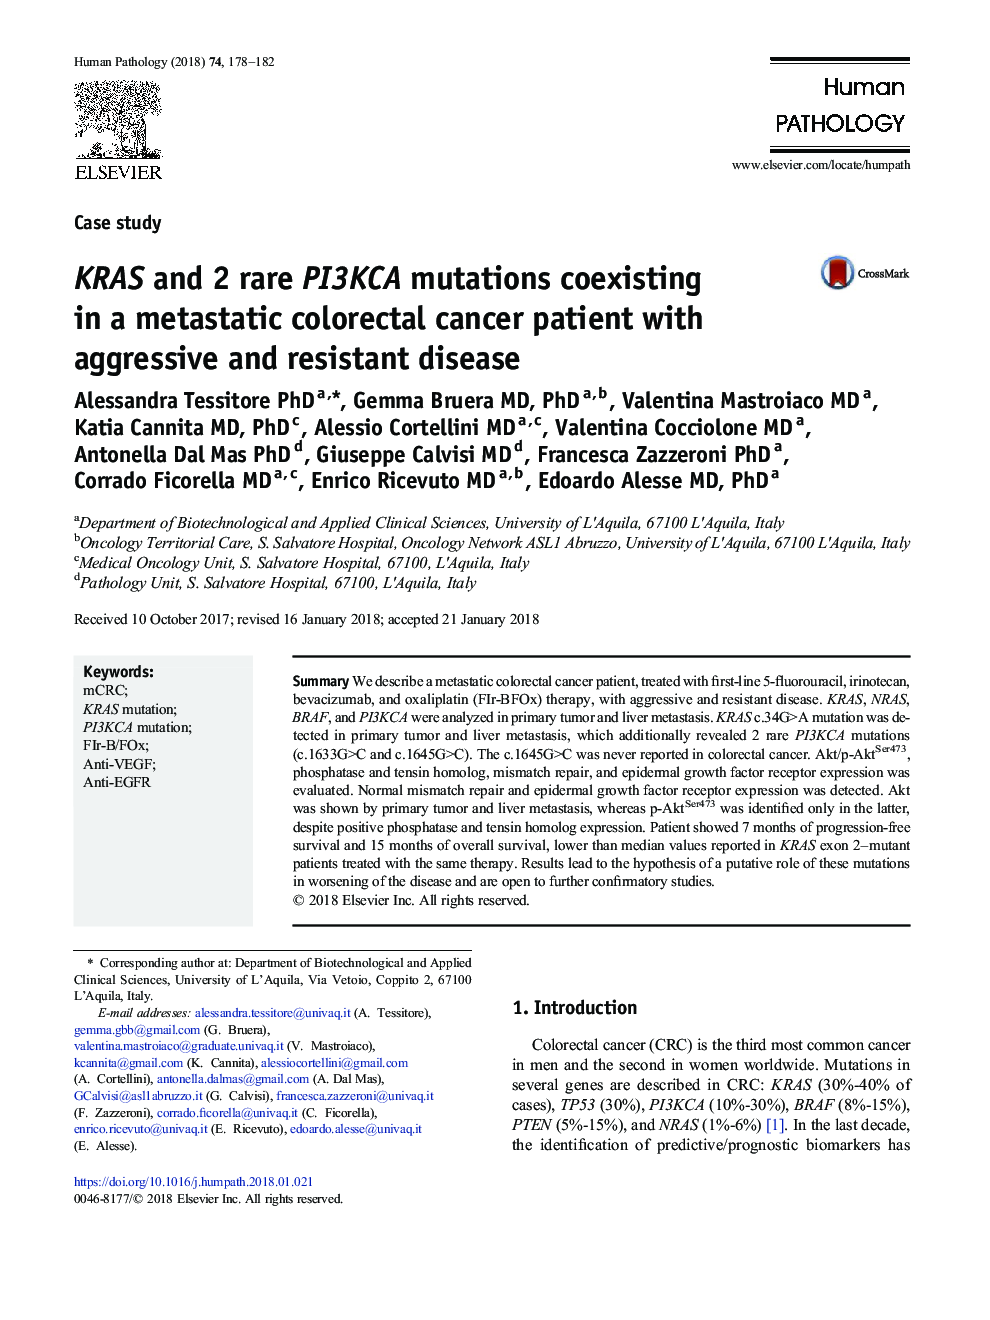 KRAS and 2 rare PI3KCA mutations coexisting in a metastatic colorectal cancer patient with aggressive and resistant disease